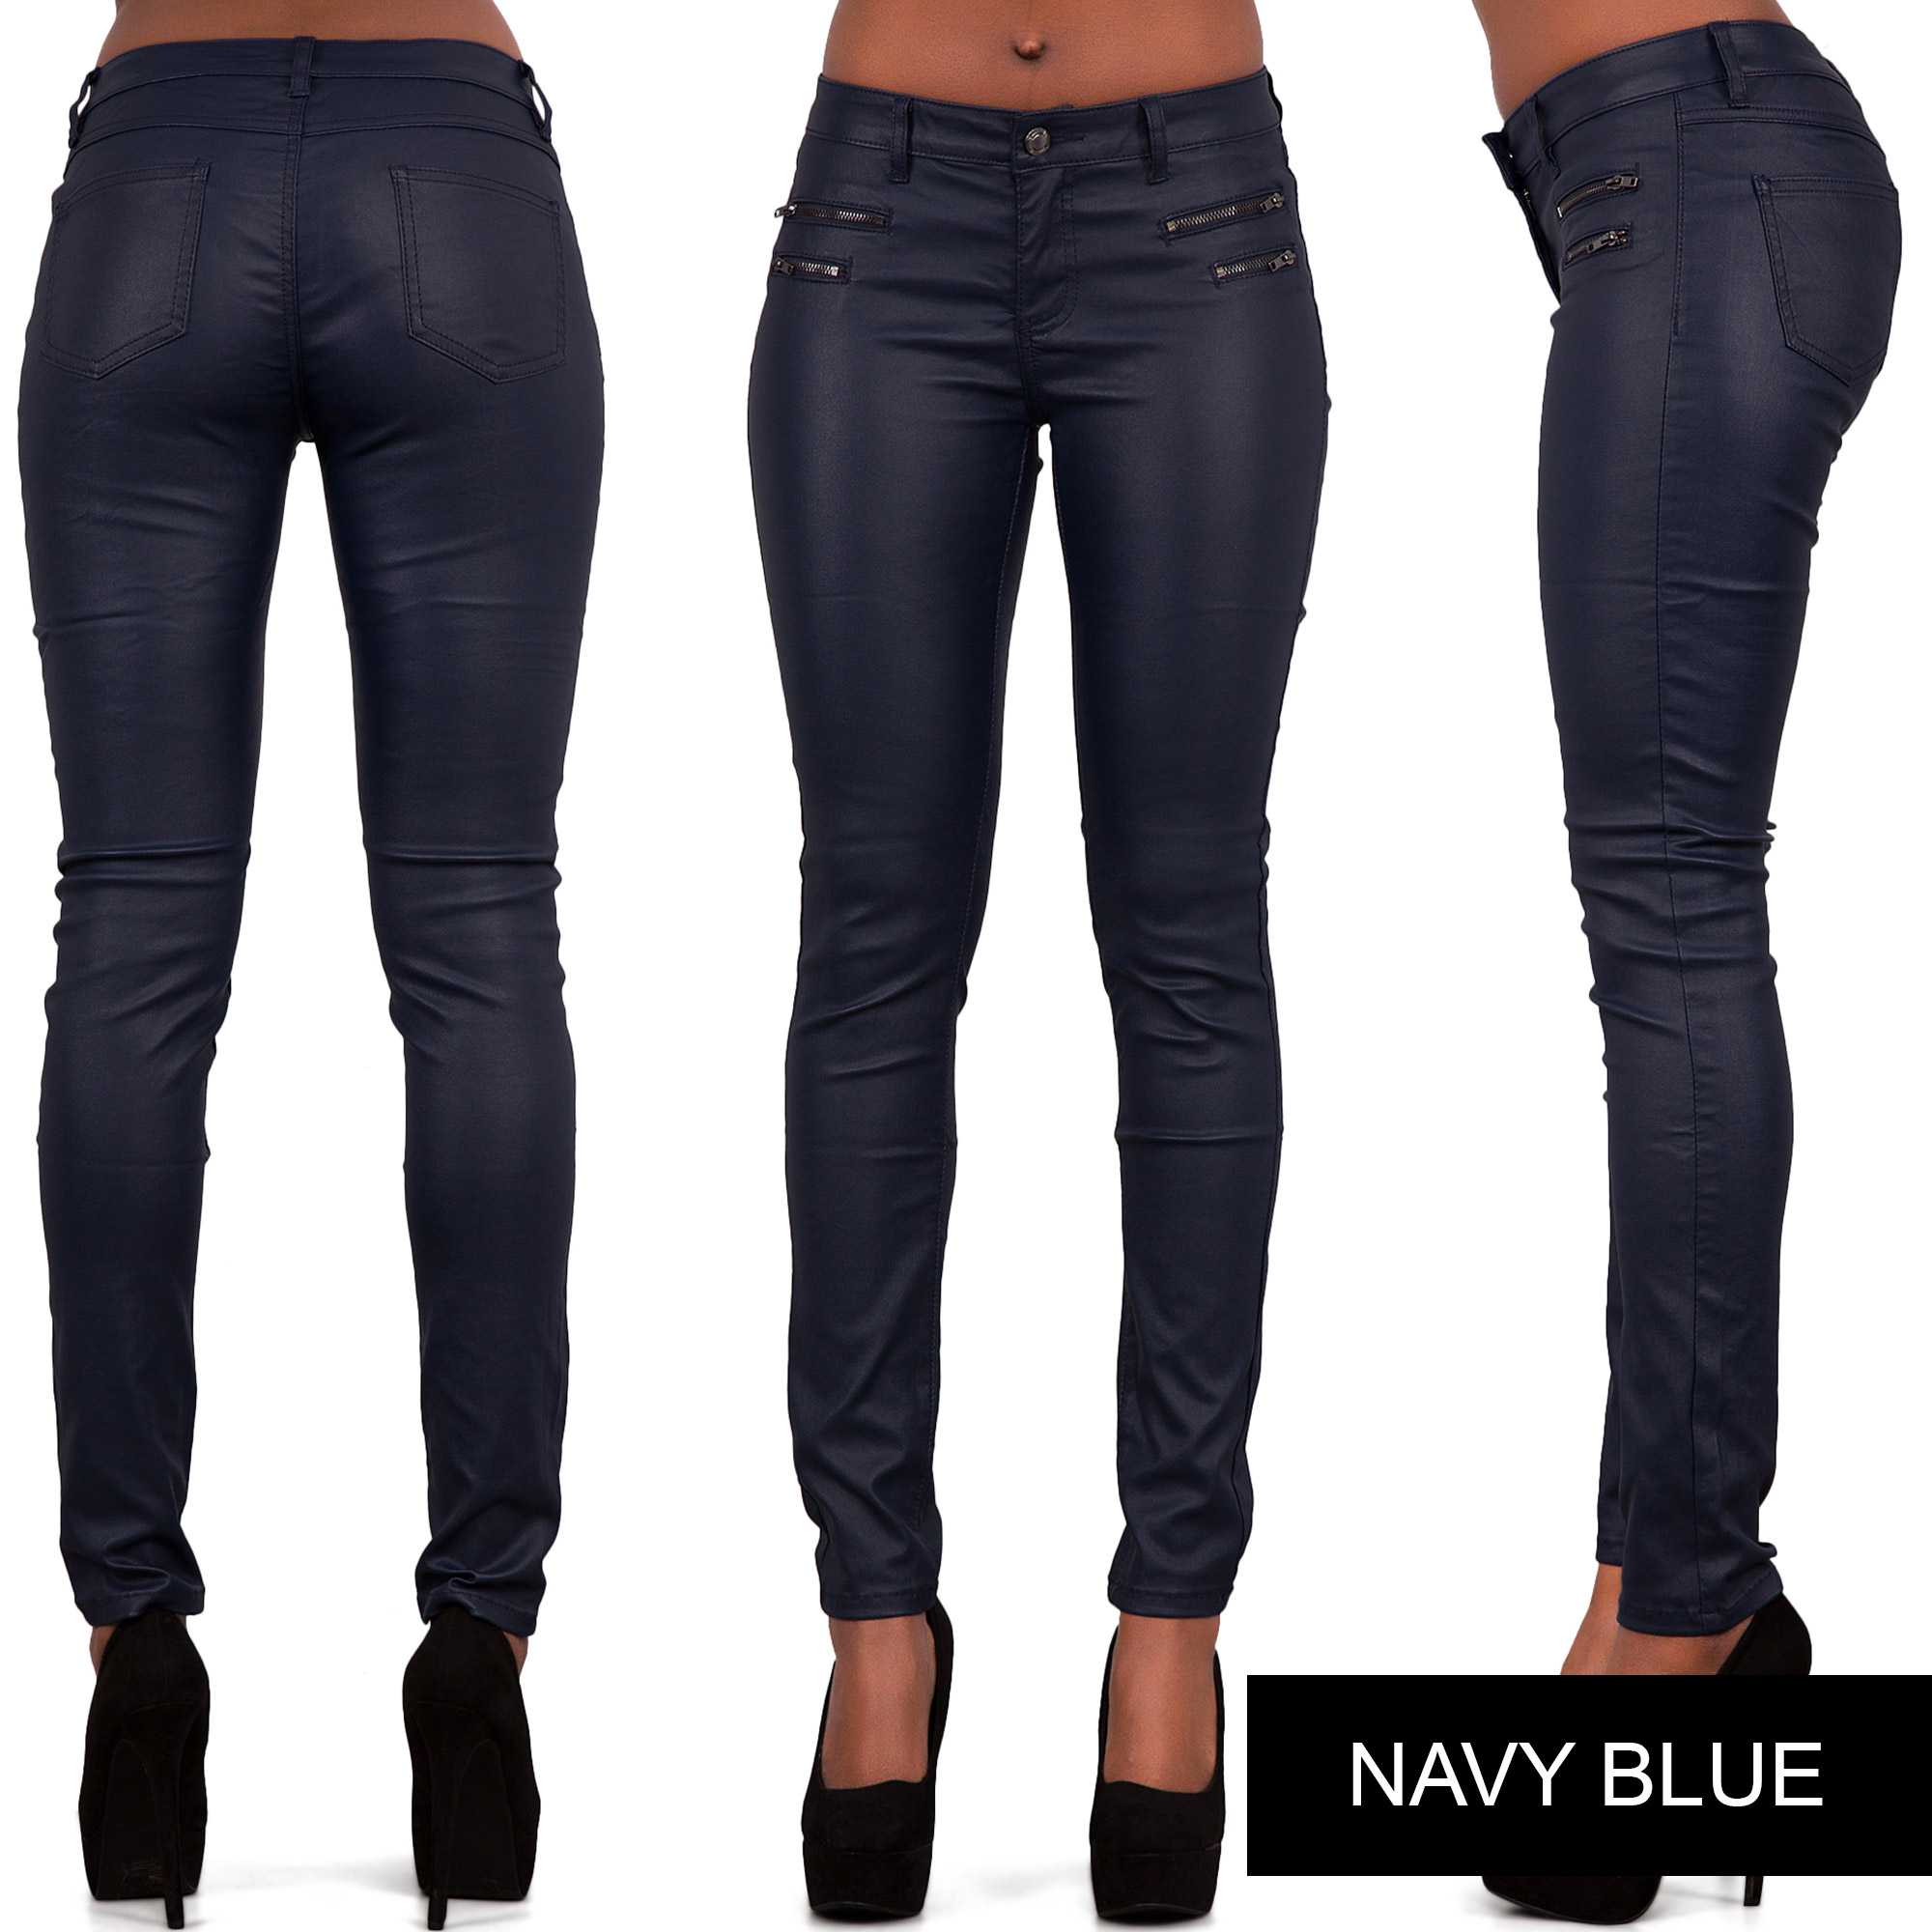 navy faux leather trousers